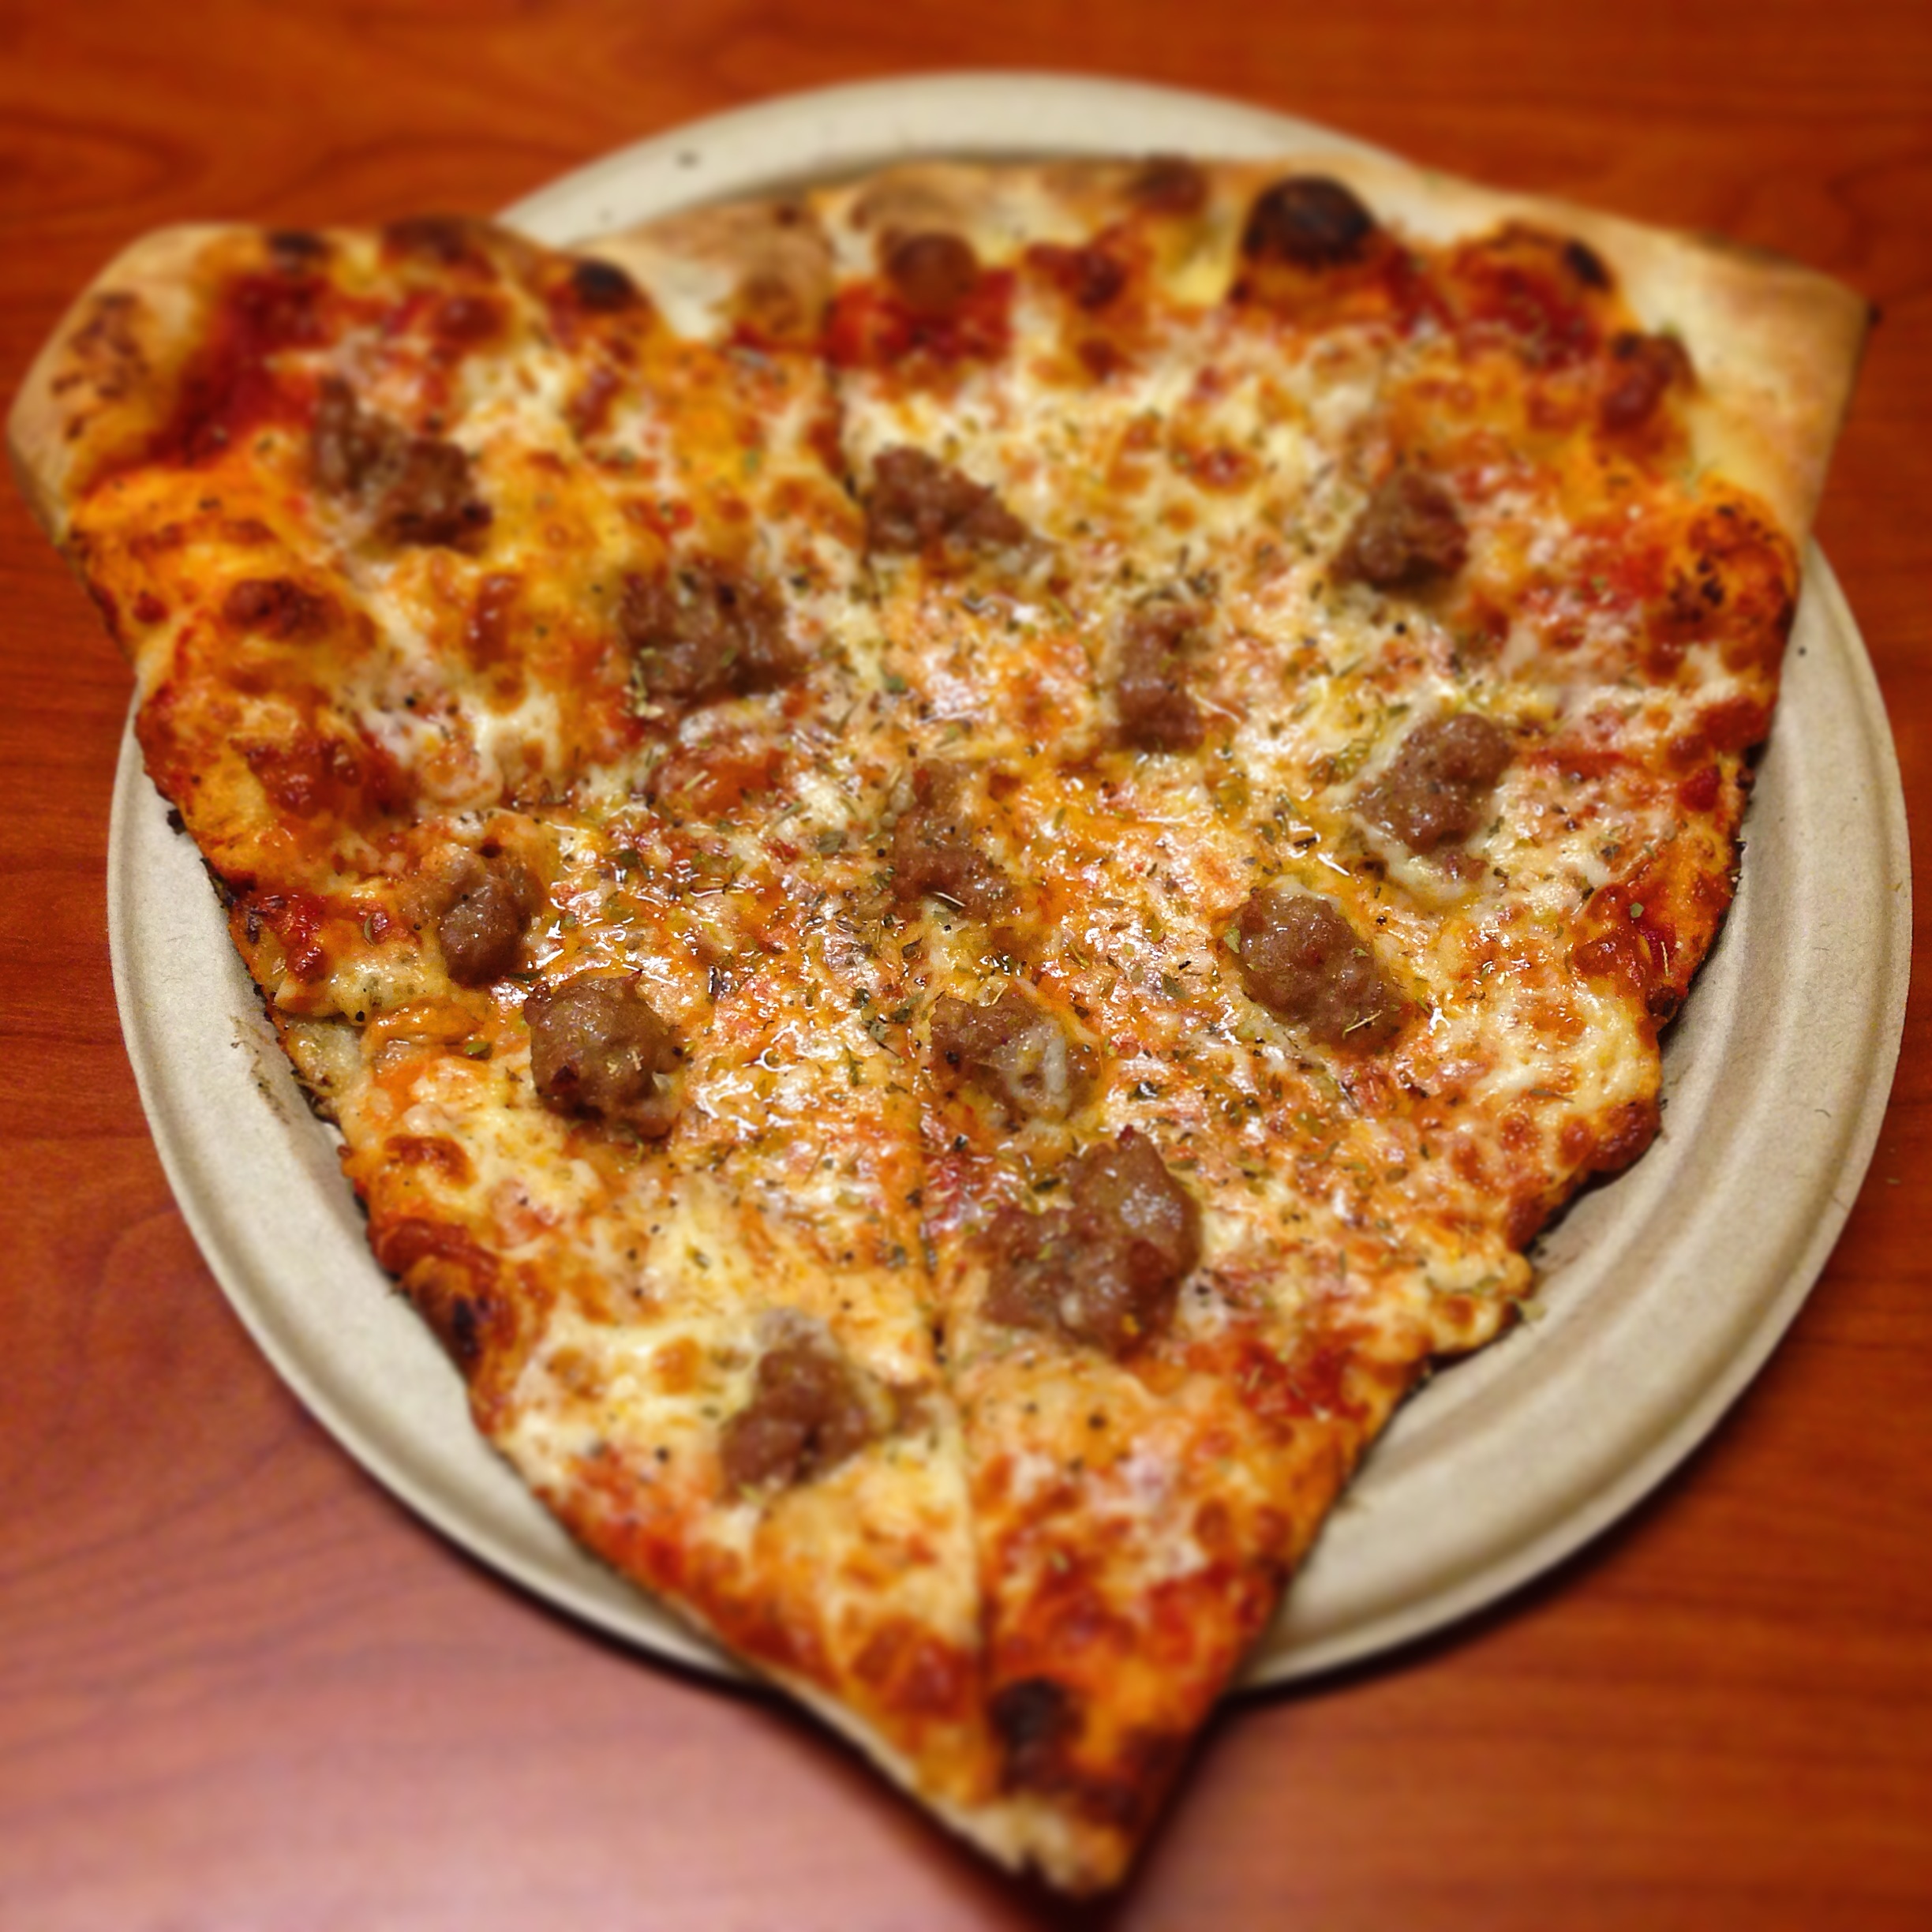 The sausage slice in all its glory.  This is what you should order.  Vegetarians, try the Deja Vu slice or Pesto Delight.  